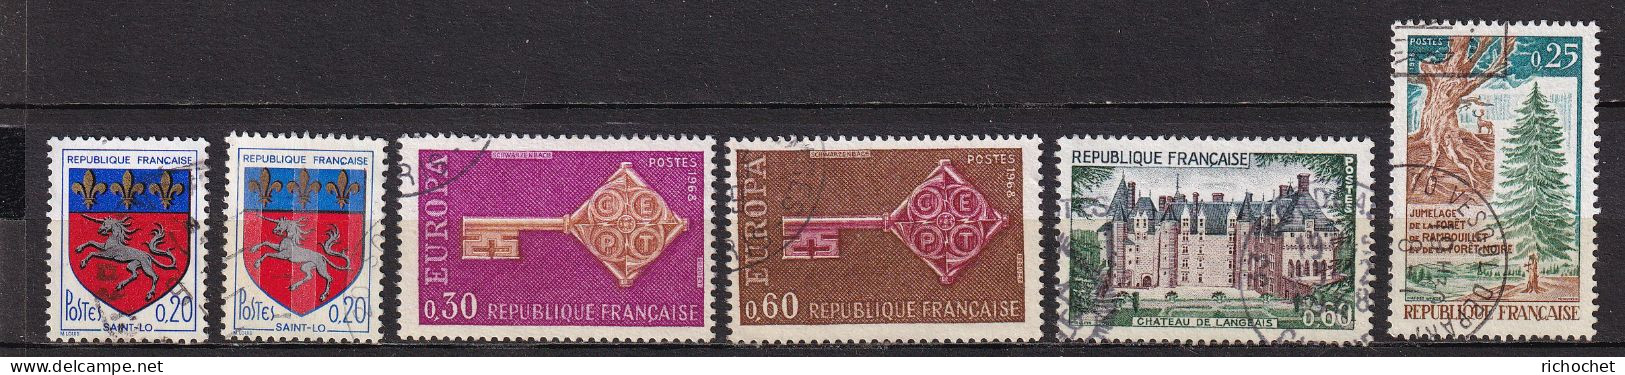 France 1510 + 1510c + 1556 + 1557 + 1559 + 1561 ° - Used Stamps